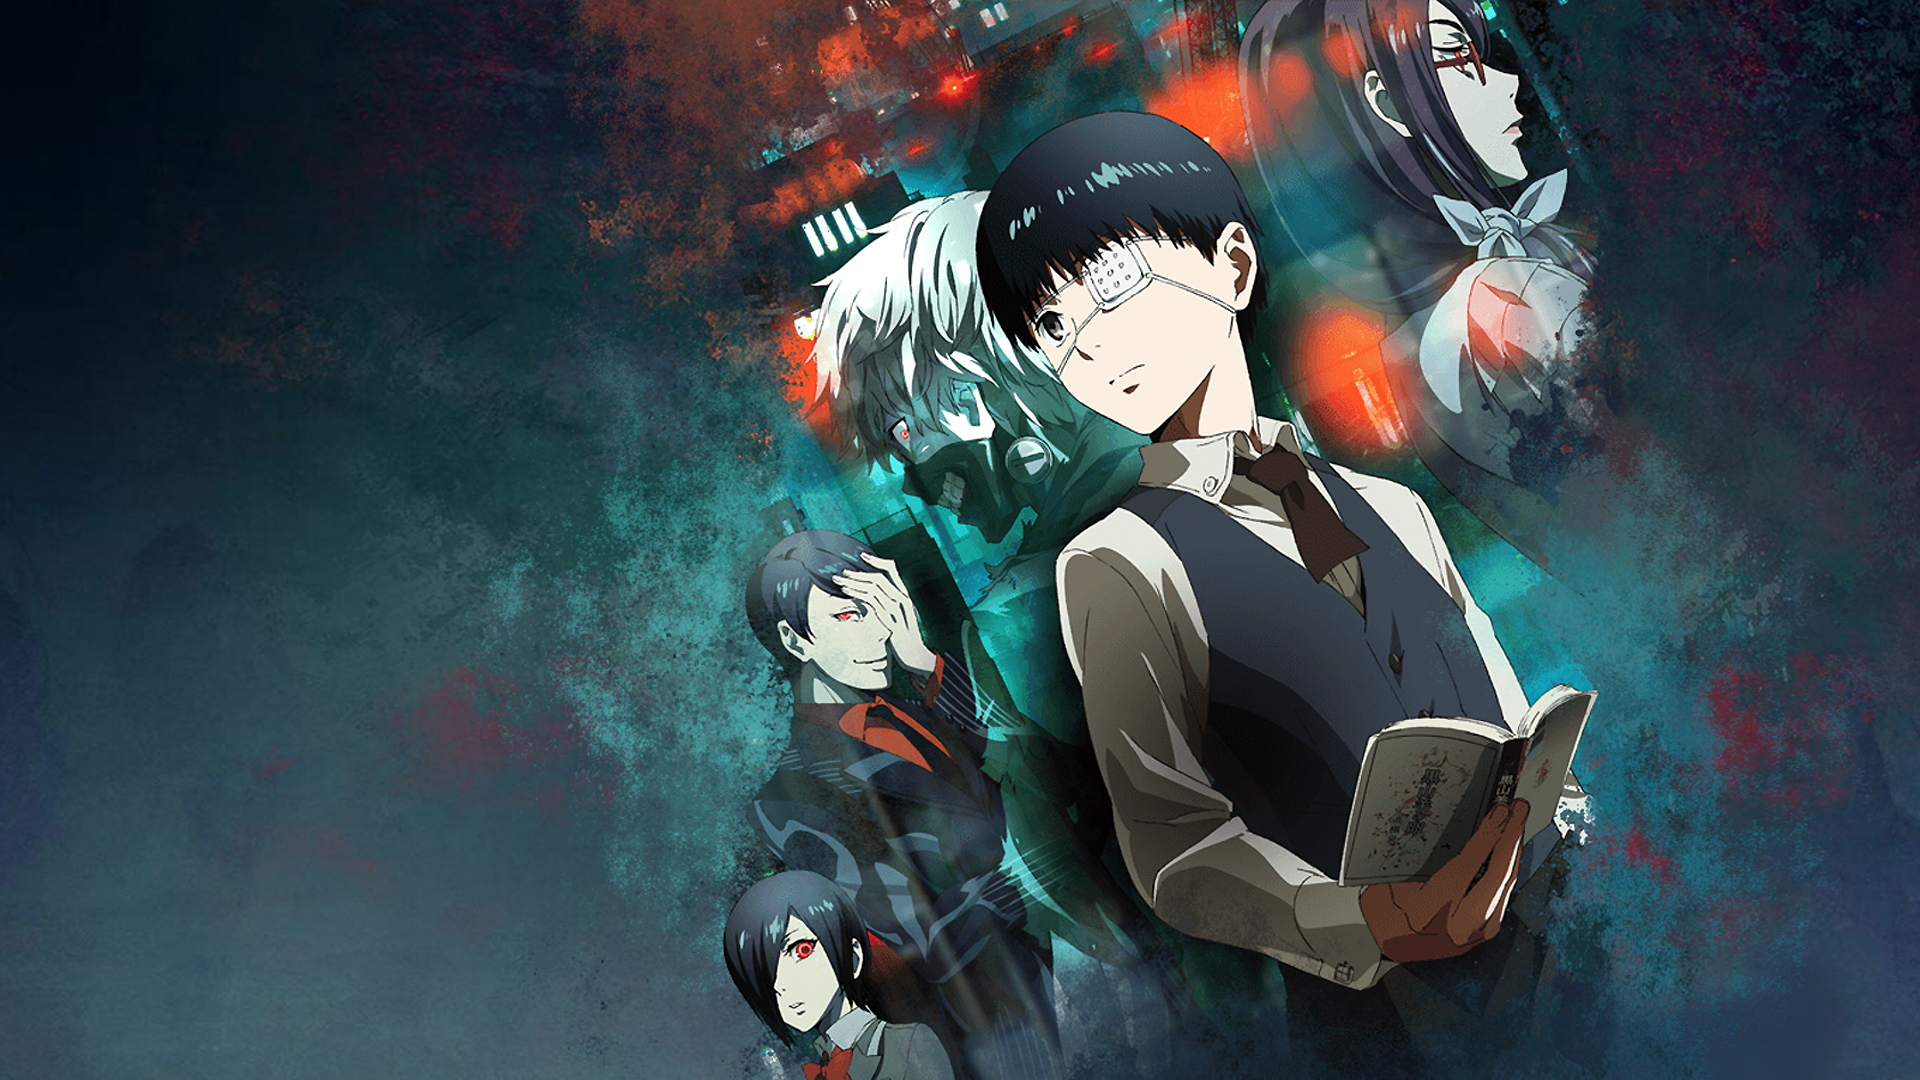 Tokyo Ghoul Wallpapers and Backgrounds - WallpaperCG